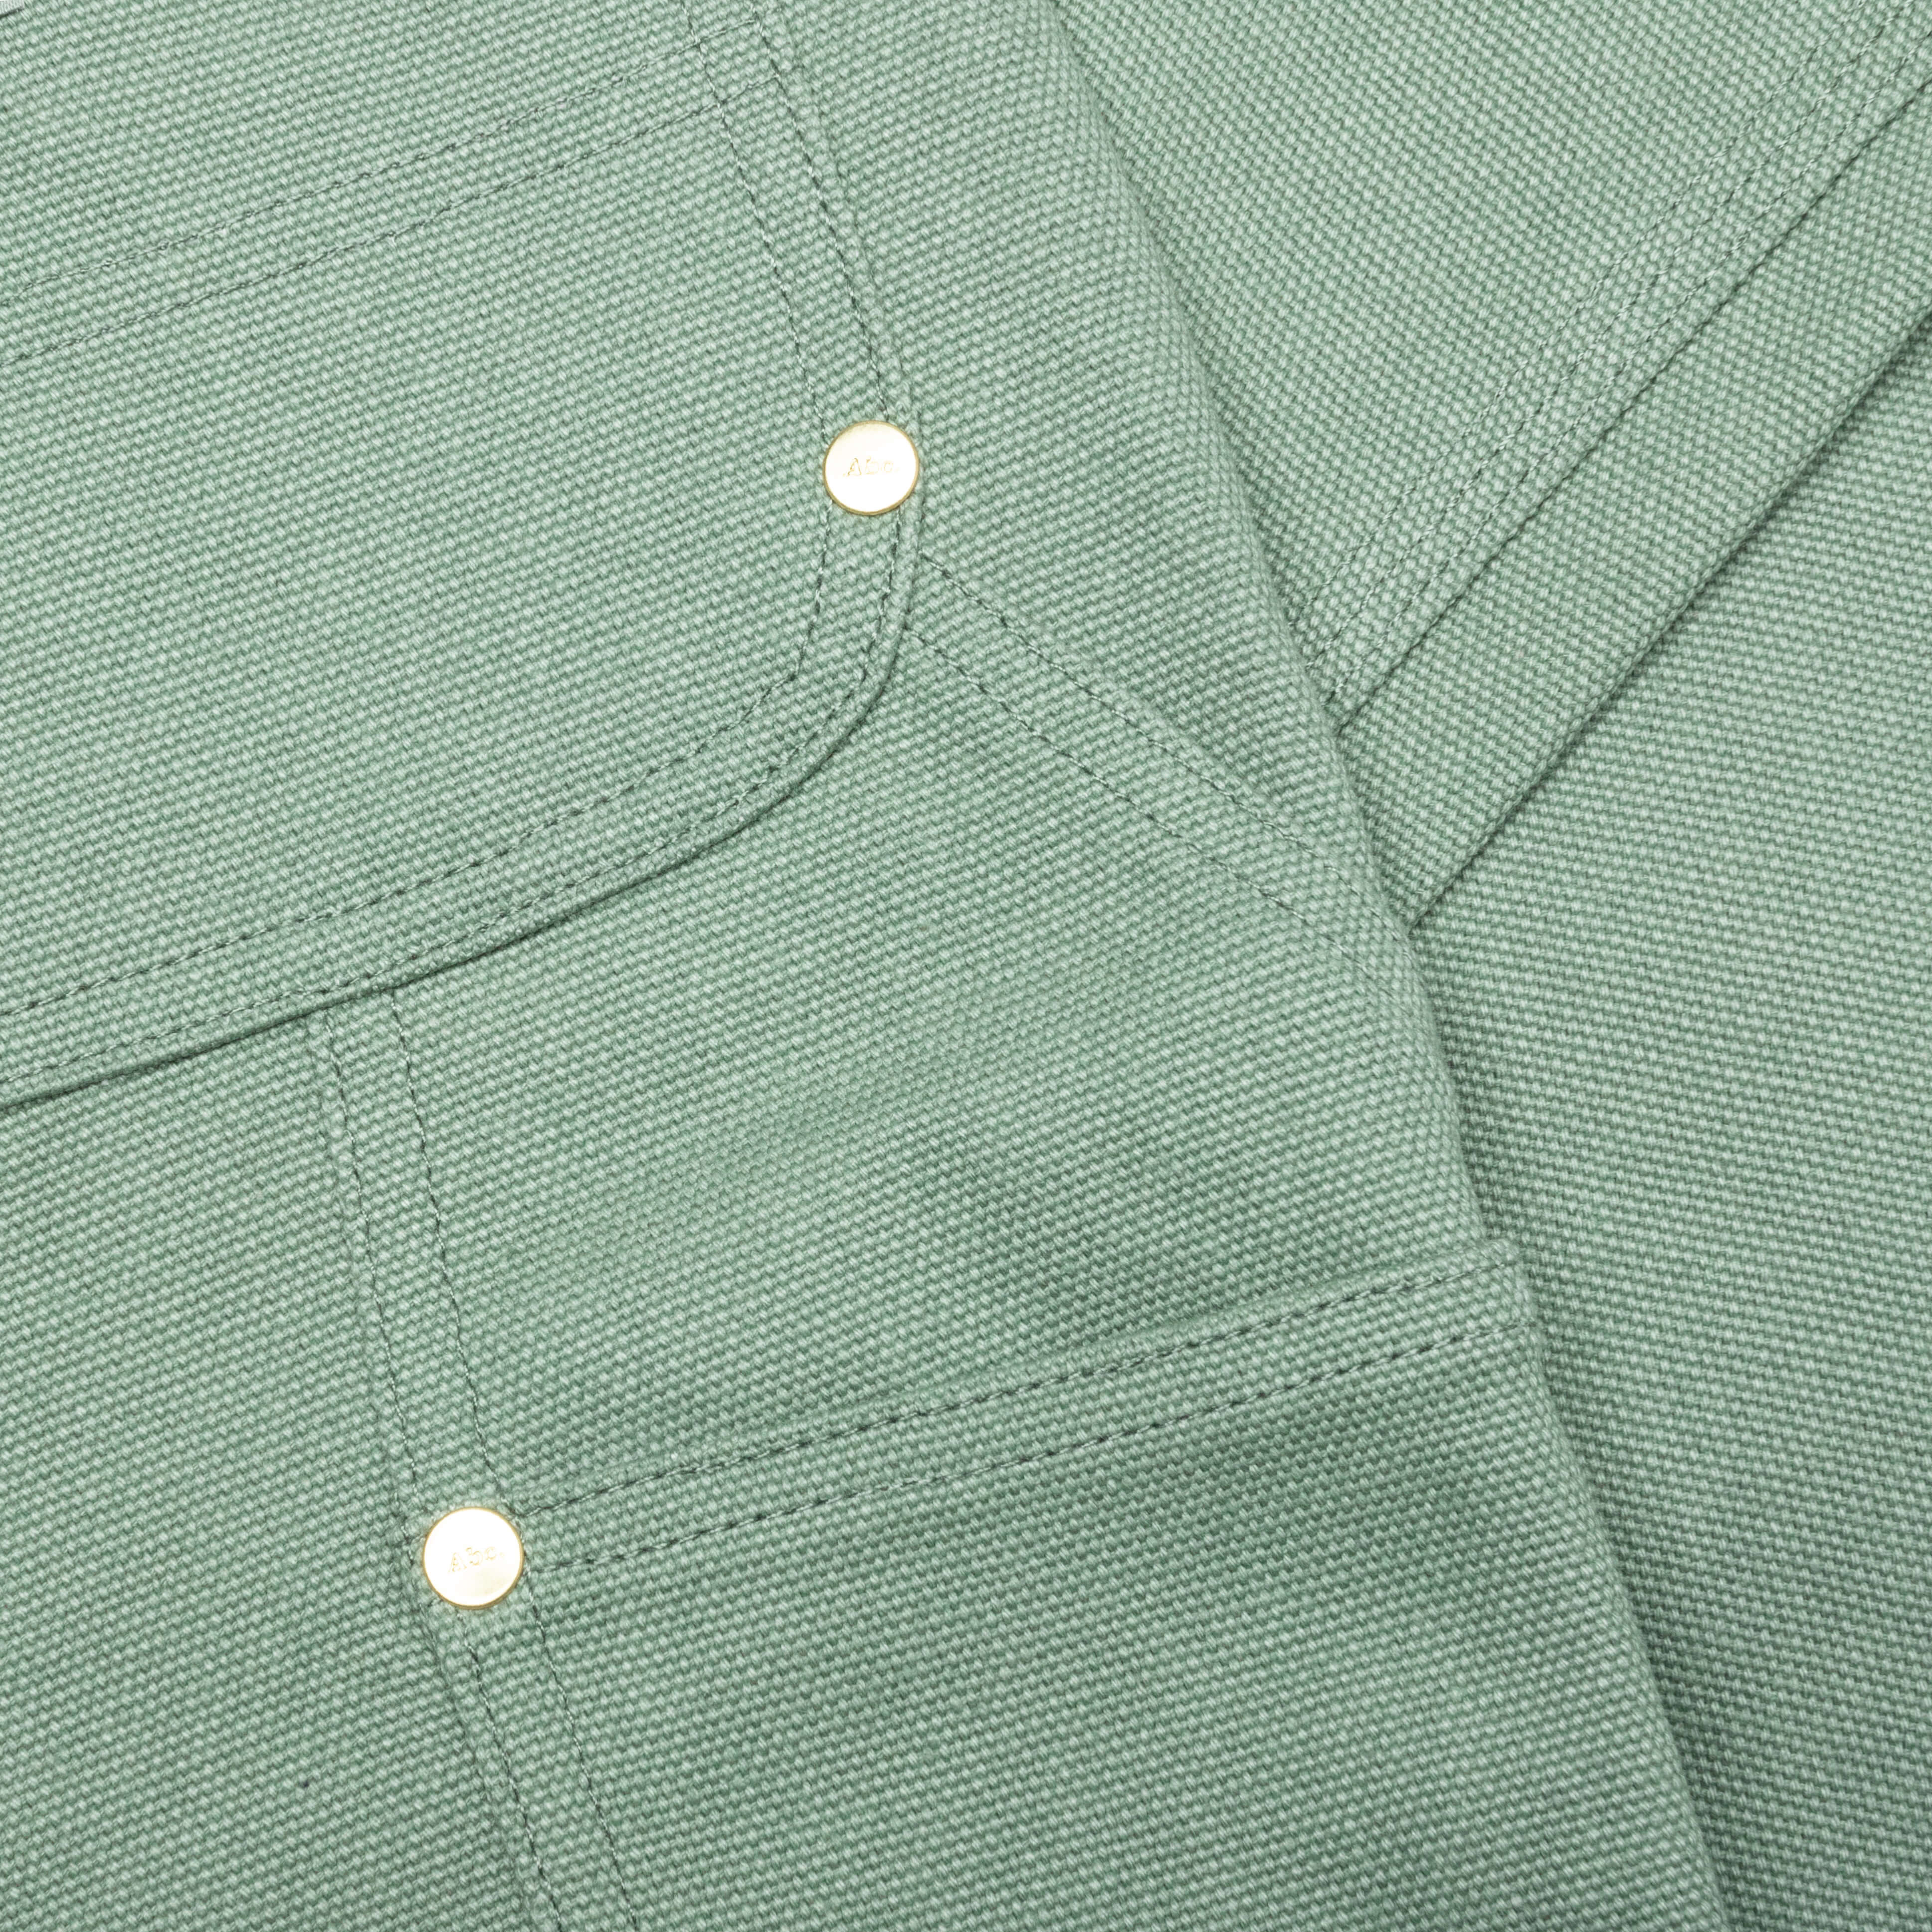 Double Knee Pant - Aventurine Green, , large image number null